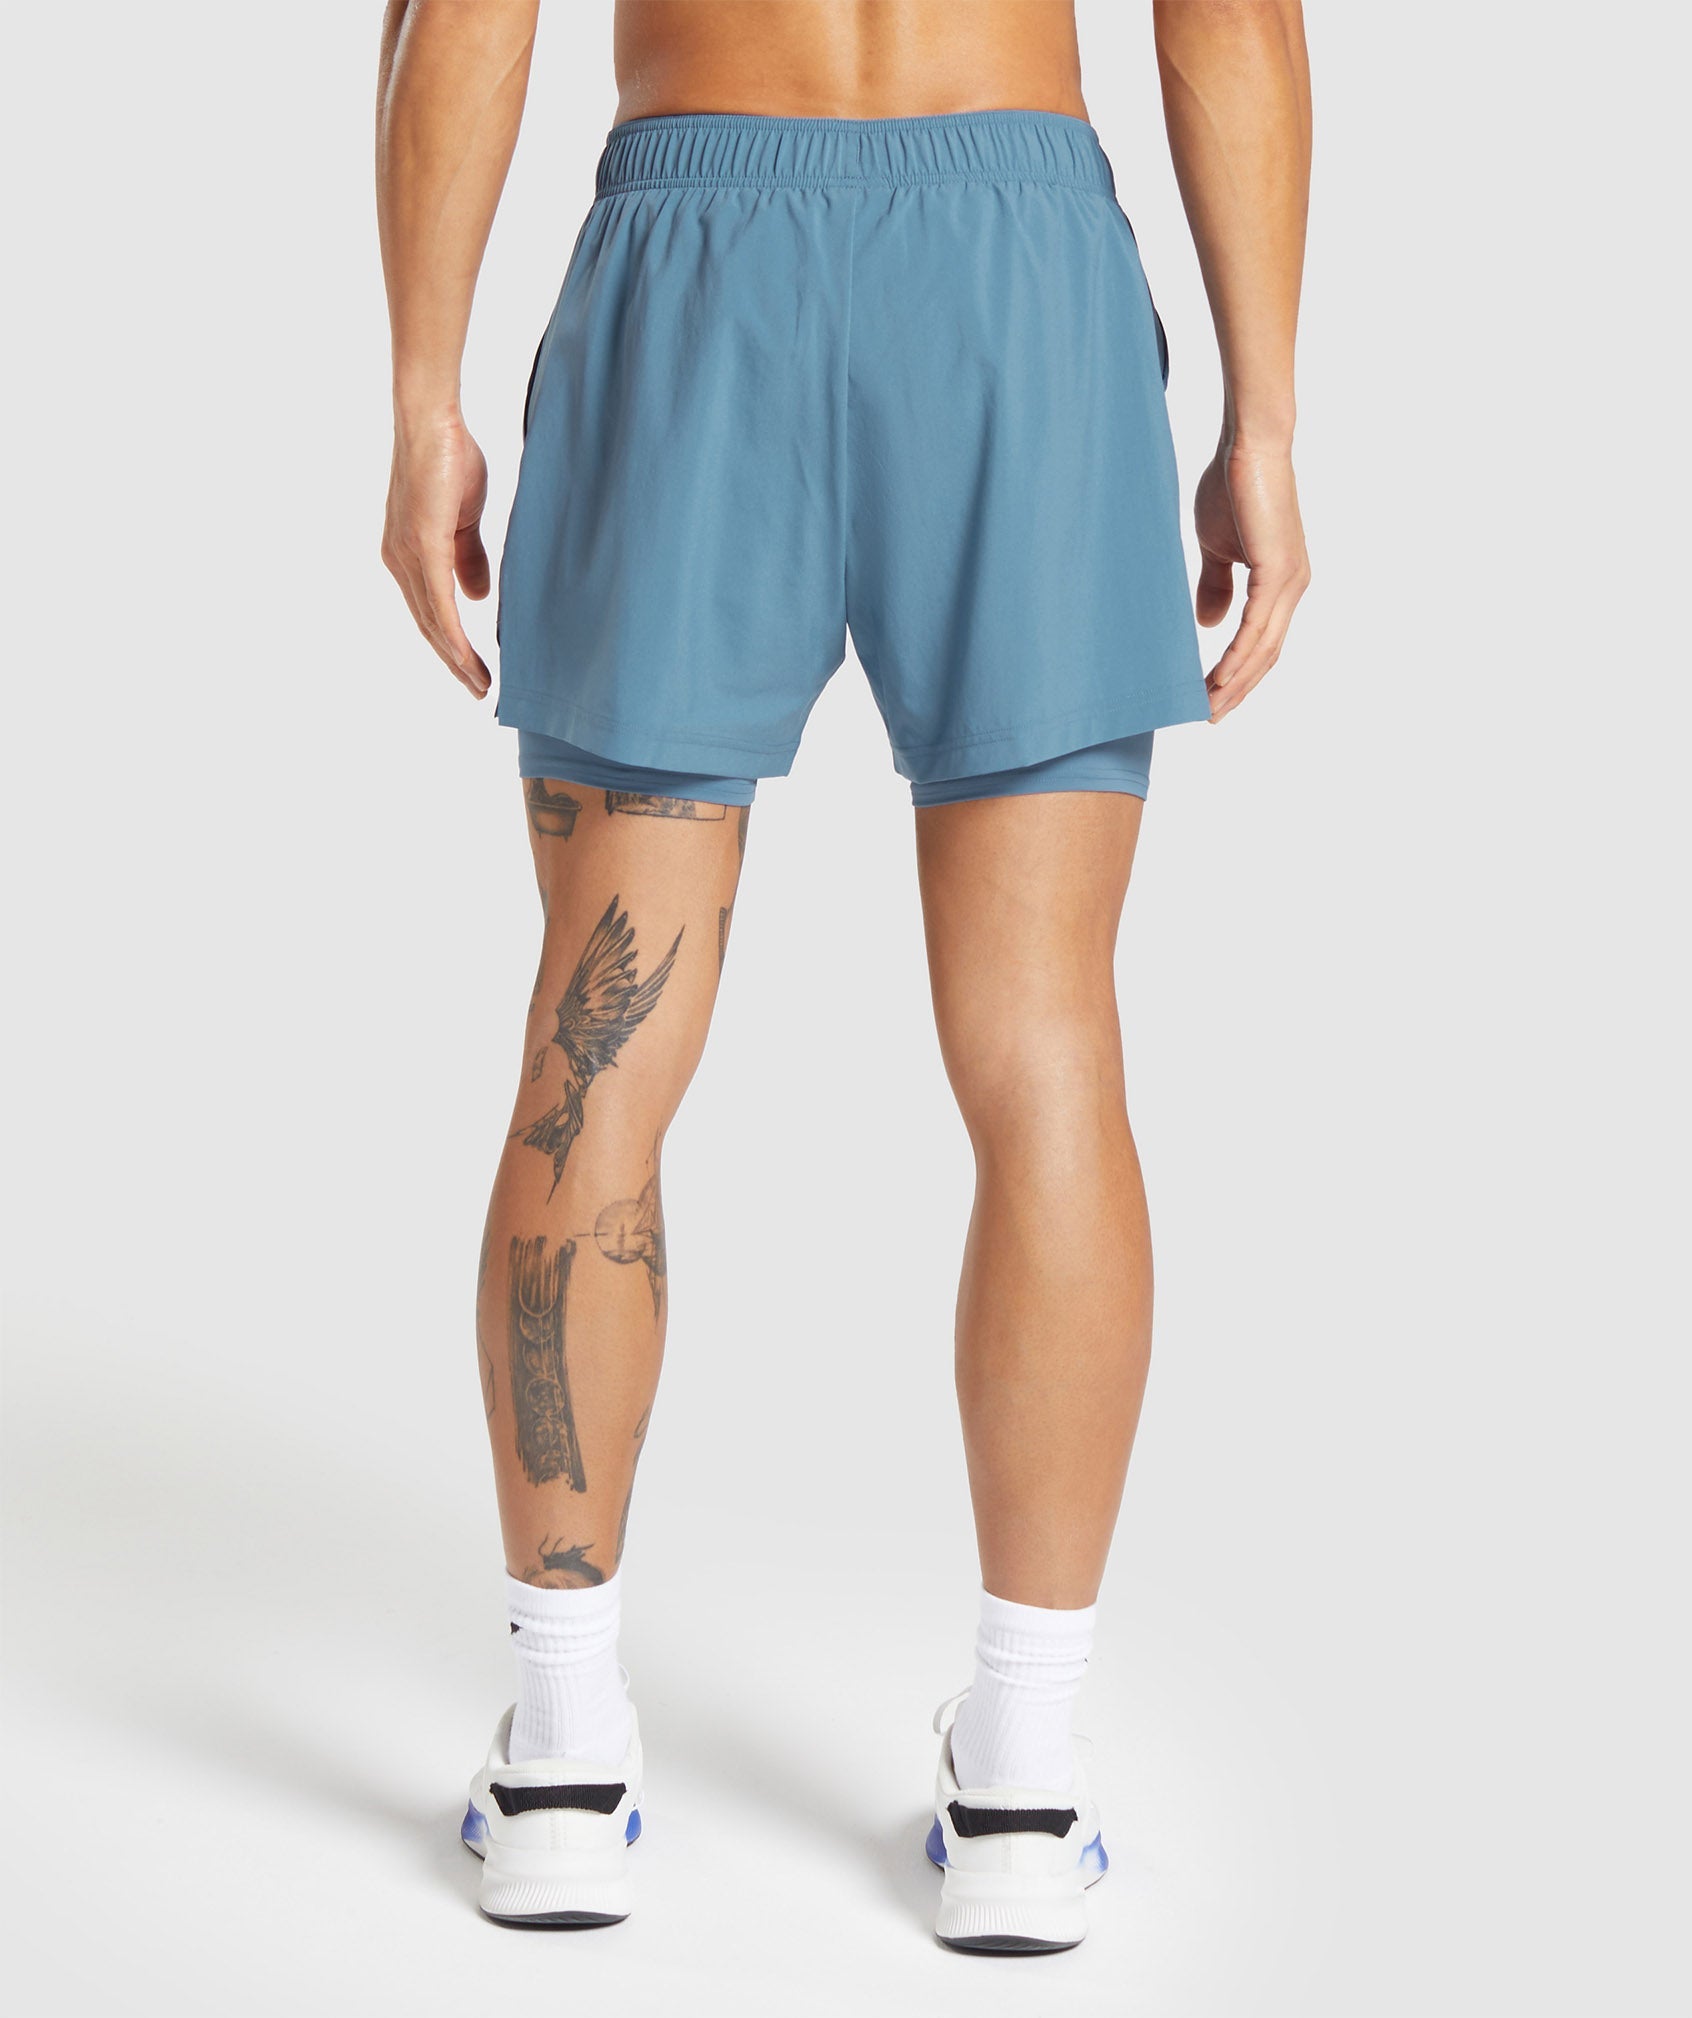 Sport 5" 2 in 1 Shorts in Faded Blue/Faded Blue - view 2